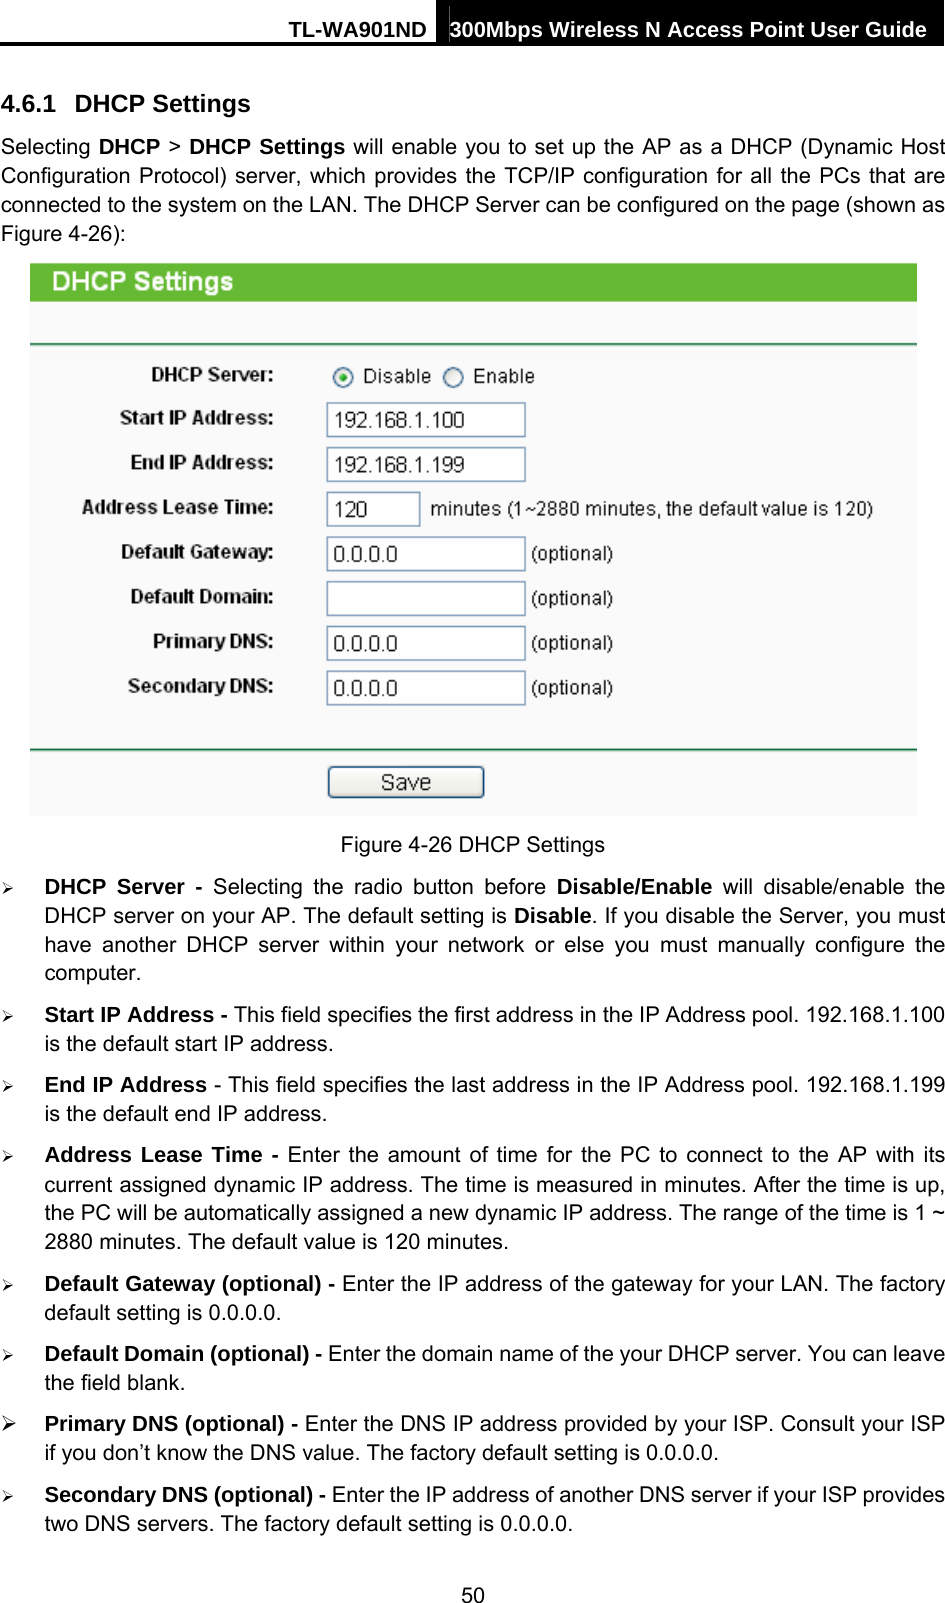 TL-WA901ND 300Mbps Wireless N Access Point User Guide 4.6.1  DHCP Settings Selecting DHCP &gt; DHCP Settings will enable you to set up the AP as a DHCP (Dynamic Host Configuration Protocol) server, which provides the TCP/IP configuration for all the PCs that are connected to the system on the LAN. The DHCP Server can be configured on the page (shown as Figure 4-26):  Figure 4-26 DHCP Settings ¾ DHCP Server - Selecting the radio button before Disable/Enable will disable/enable the DHCP server on your AP. The default setting is Disable. If you disable the Server, you must have another DHCP server within your network or else you must manually configure the computer. ¾ Start IP Address - This field specifies the first address in the IP Address pool. 192.168.1.100 is the default start IP address.   ¾ End IP Address - This field specifies the last address in the IP Address pool. 192.168.1.199 is the default end IP address.   ¾ Address Lease Time - Enter the amount of time for the PC to connect to the AP with its current assigned dynamic IP address. The time is measured in minutes. After the time is up, the PC will be automatically assigned a new dynamic IP address. The range of the time is 1 ~ 2880 minutes. The default value is 120 minutes. ¾ Default Gateway (optional) - Enter the IP address of the gateway for your LAN. The factory default setting is 0.0.0.0. ¾ Default Domain (optional) - Enter the domain name of the your DHCP server. You can leave the field blank. ¾ Primary DNS (optional) - Enter the DNS IP address provided by your ISP. Consult your ISP if you don’t know the DNS value. The factory default setting is 0.0.0.0. ¾ Secondary DNS (optional) - Enter the IP address of another DNS server if your ISP provides two DNS servers. The factory default setting is 0.0.0.0. 50 